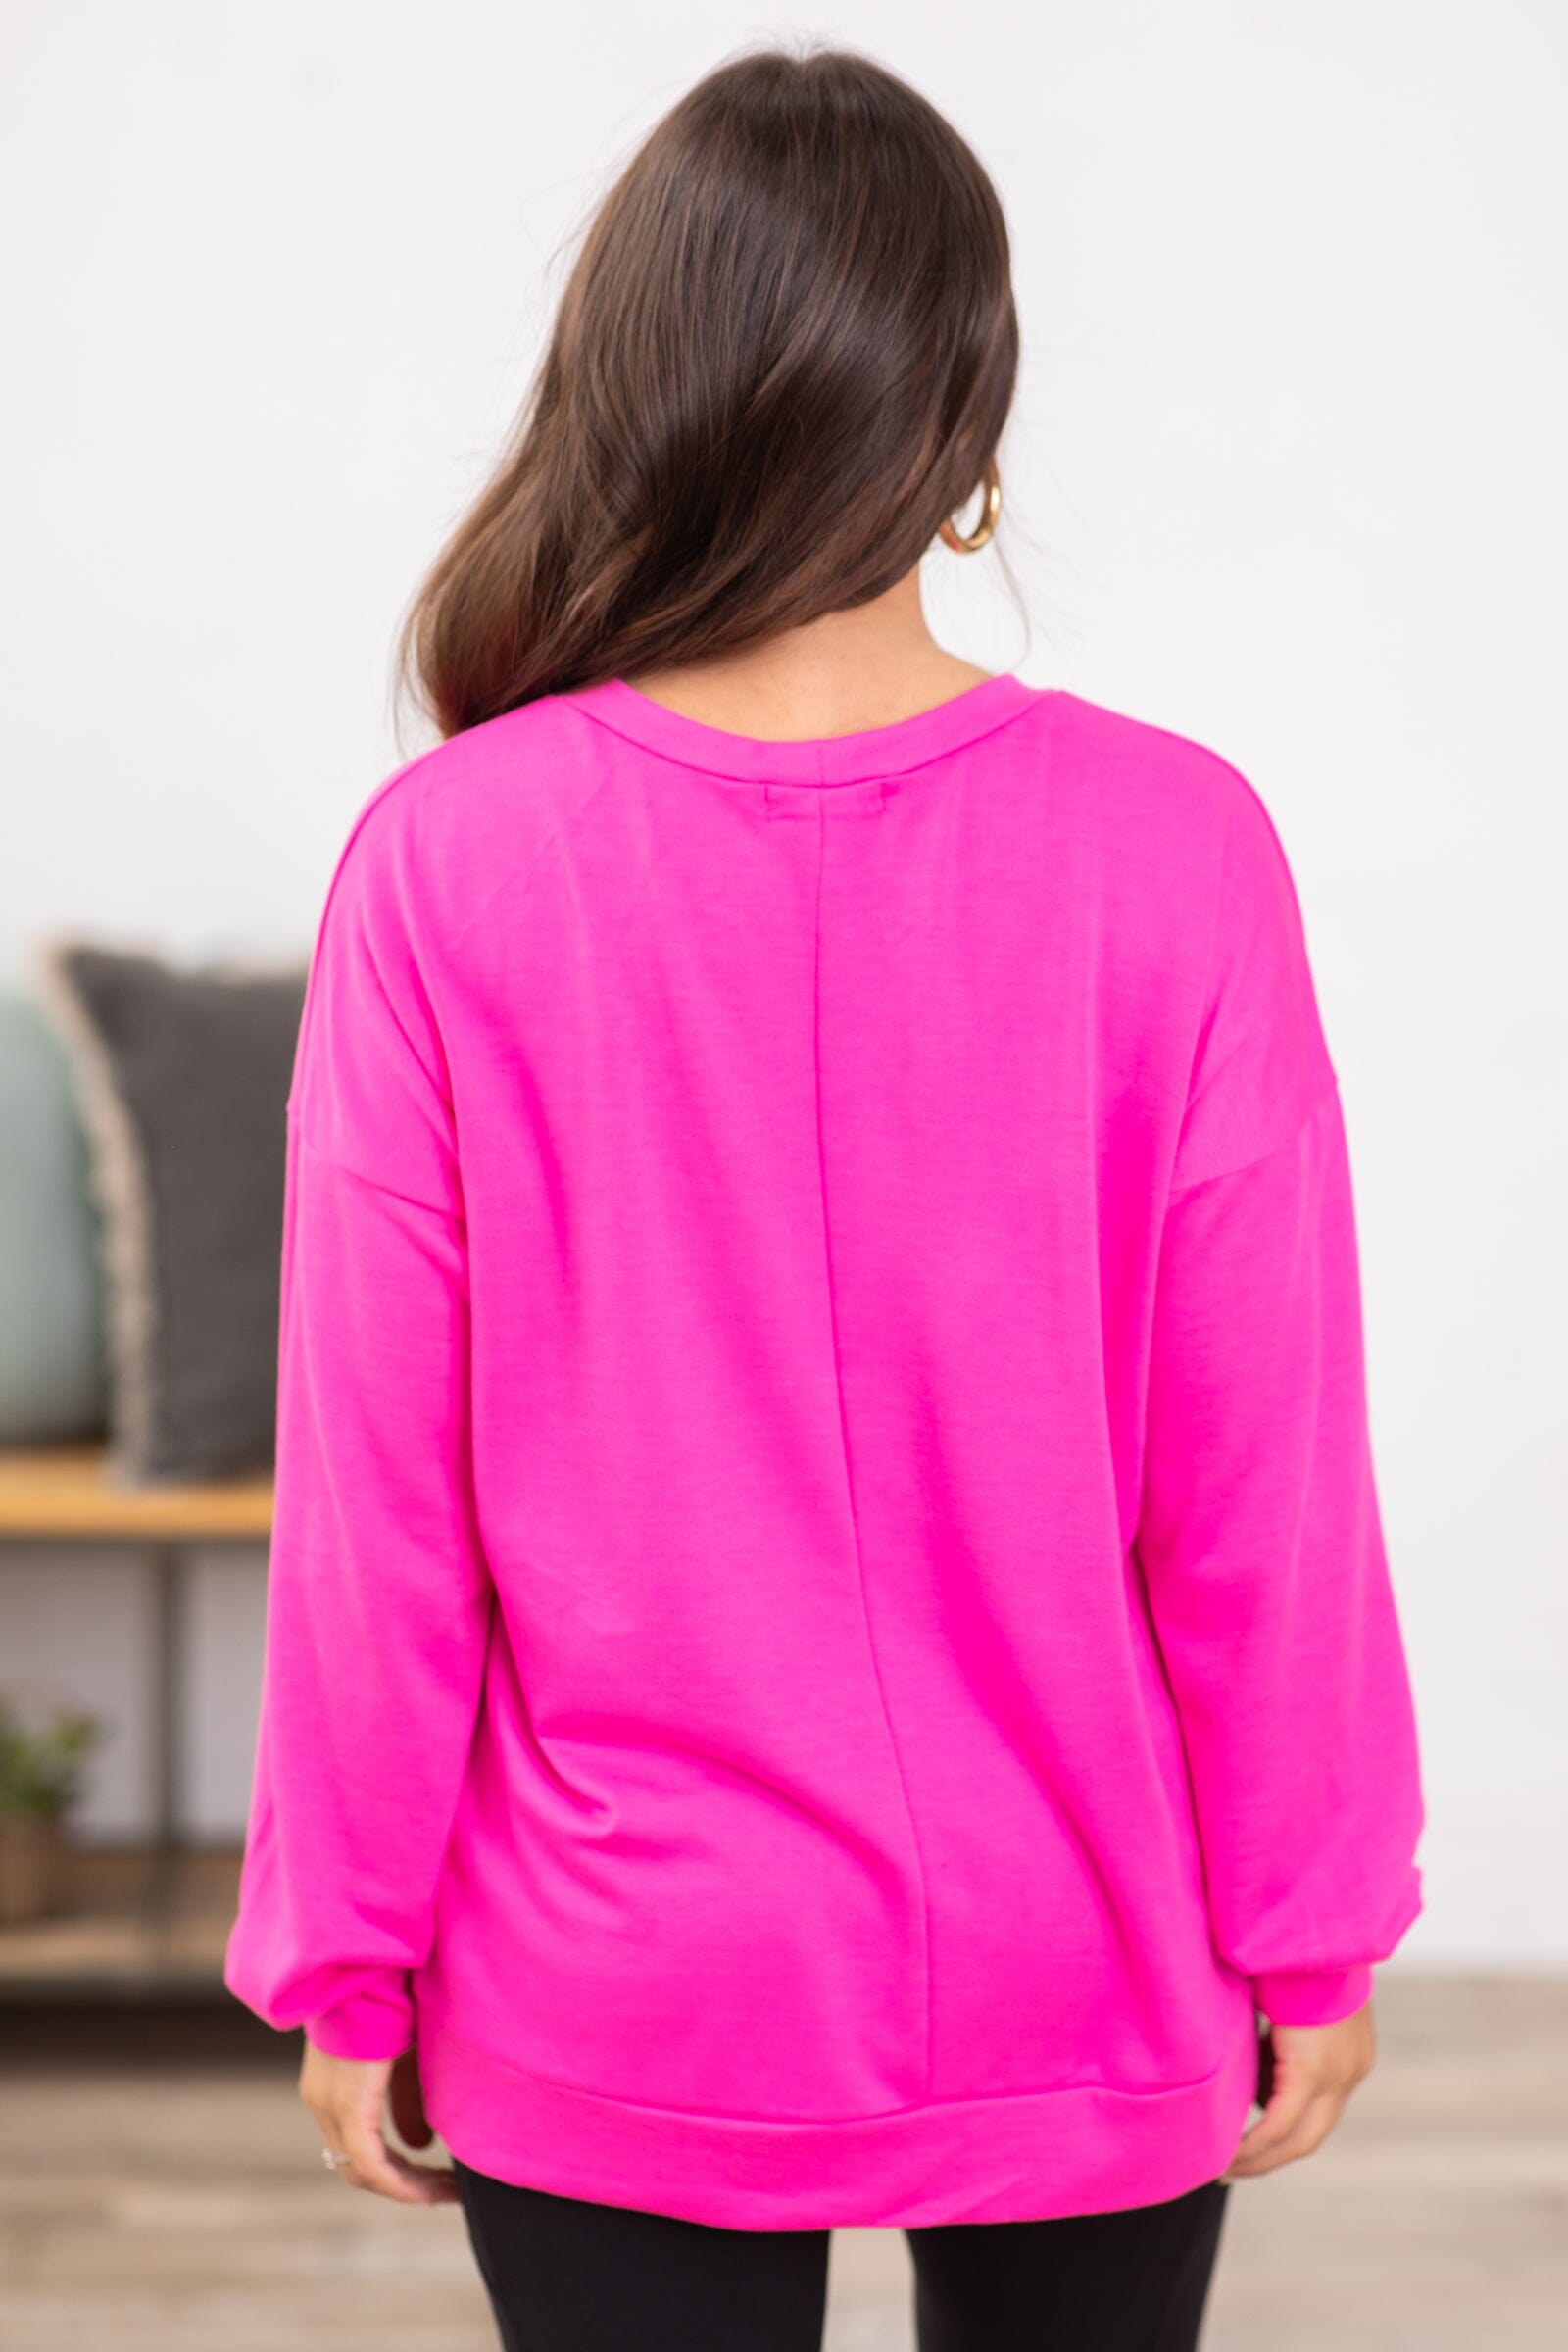 Hot Pink Crew Neck Long Sleeve Top - Filly Flair